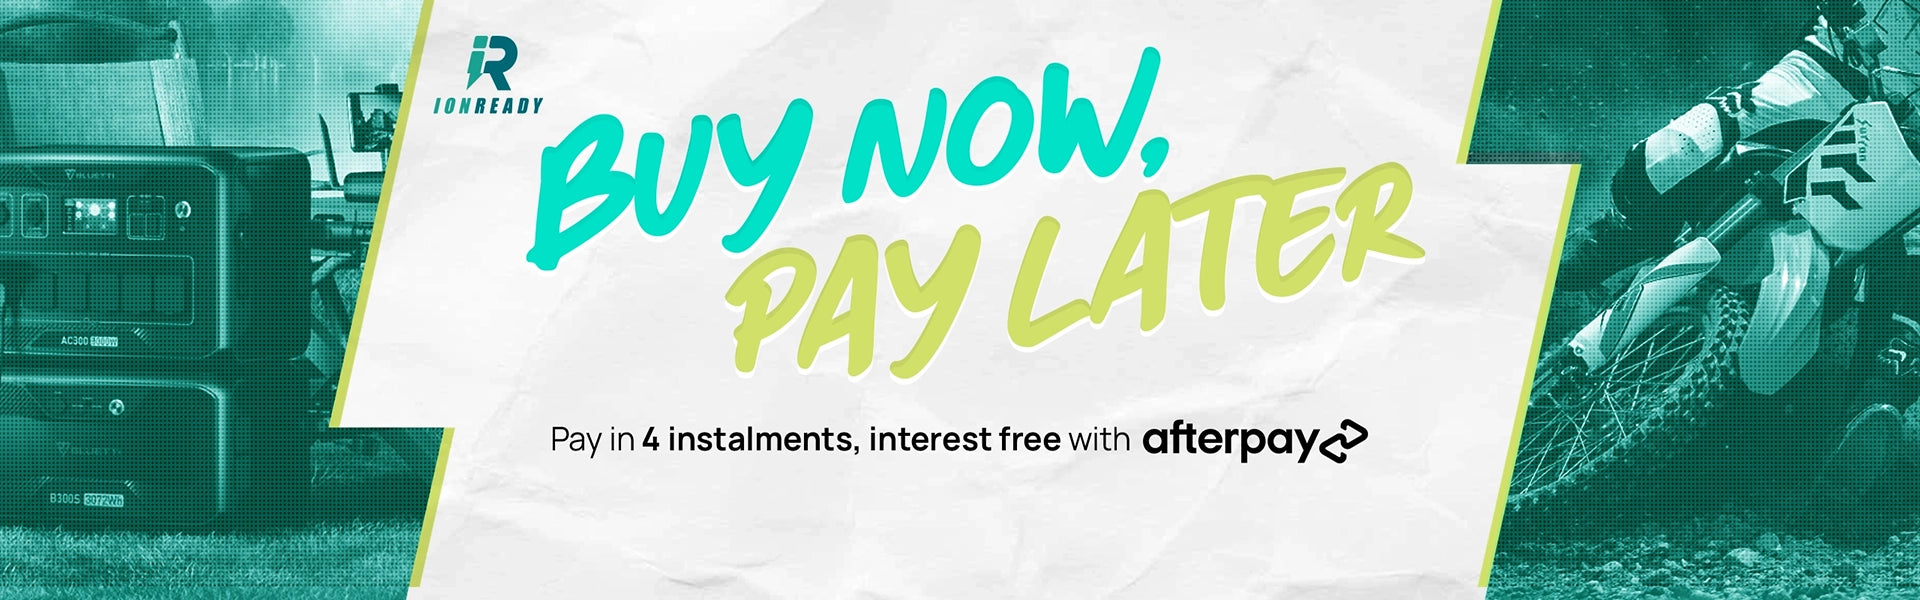 Buy Now & Pay Later with Afterpay - IONREADY